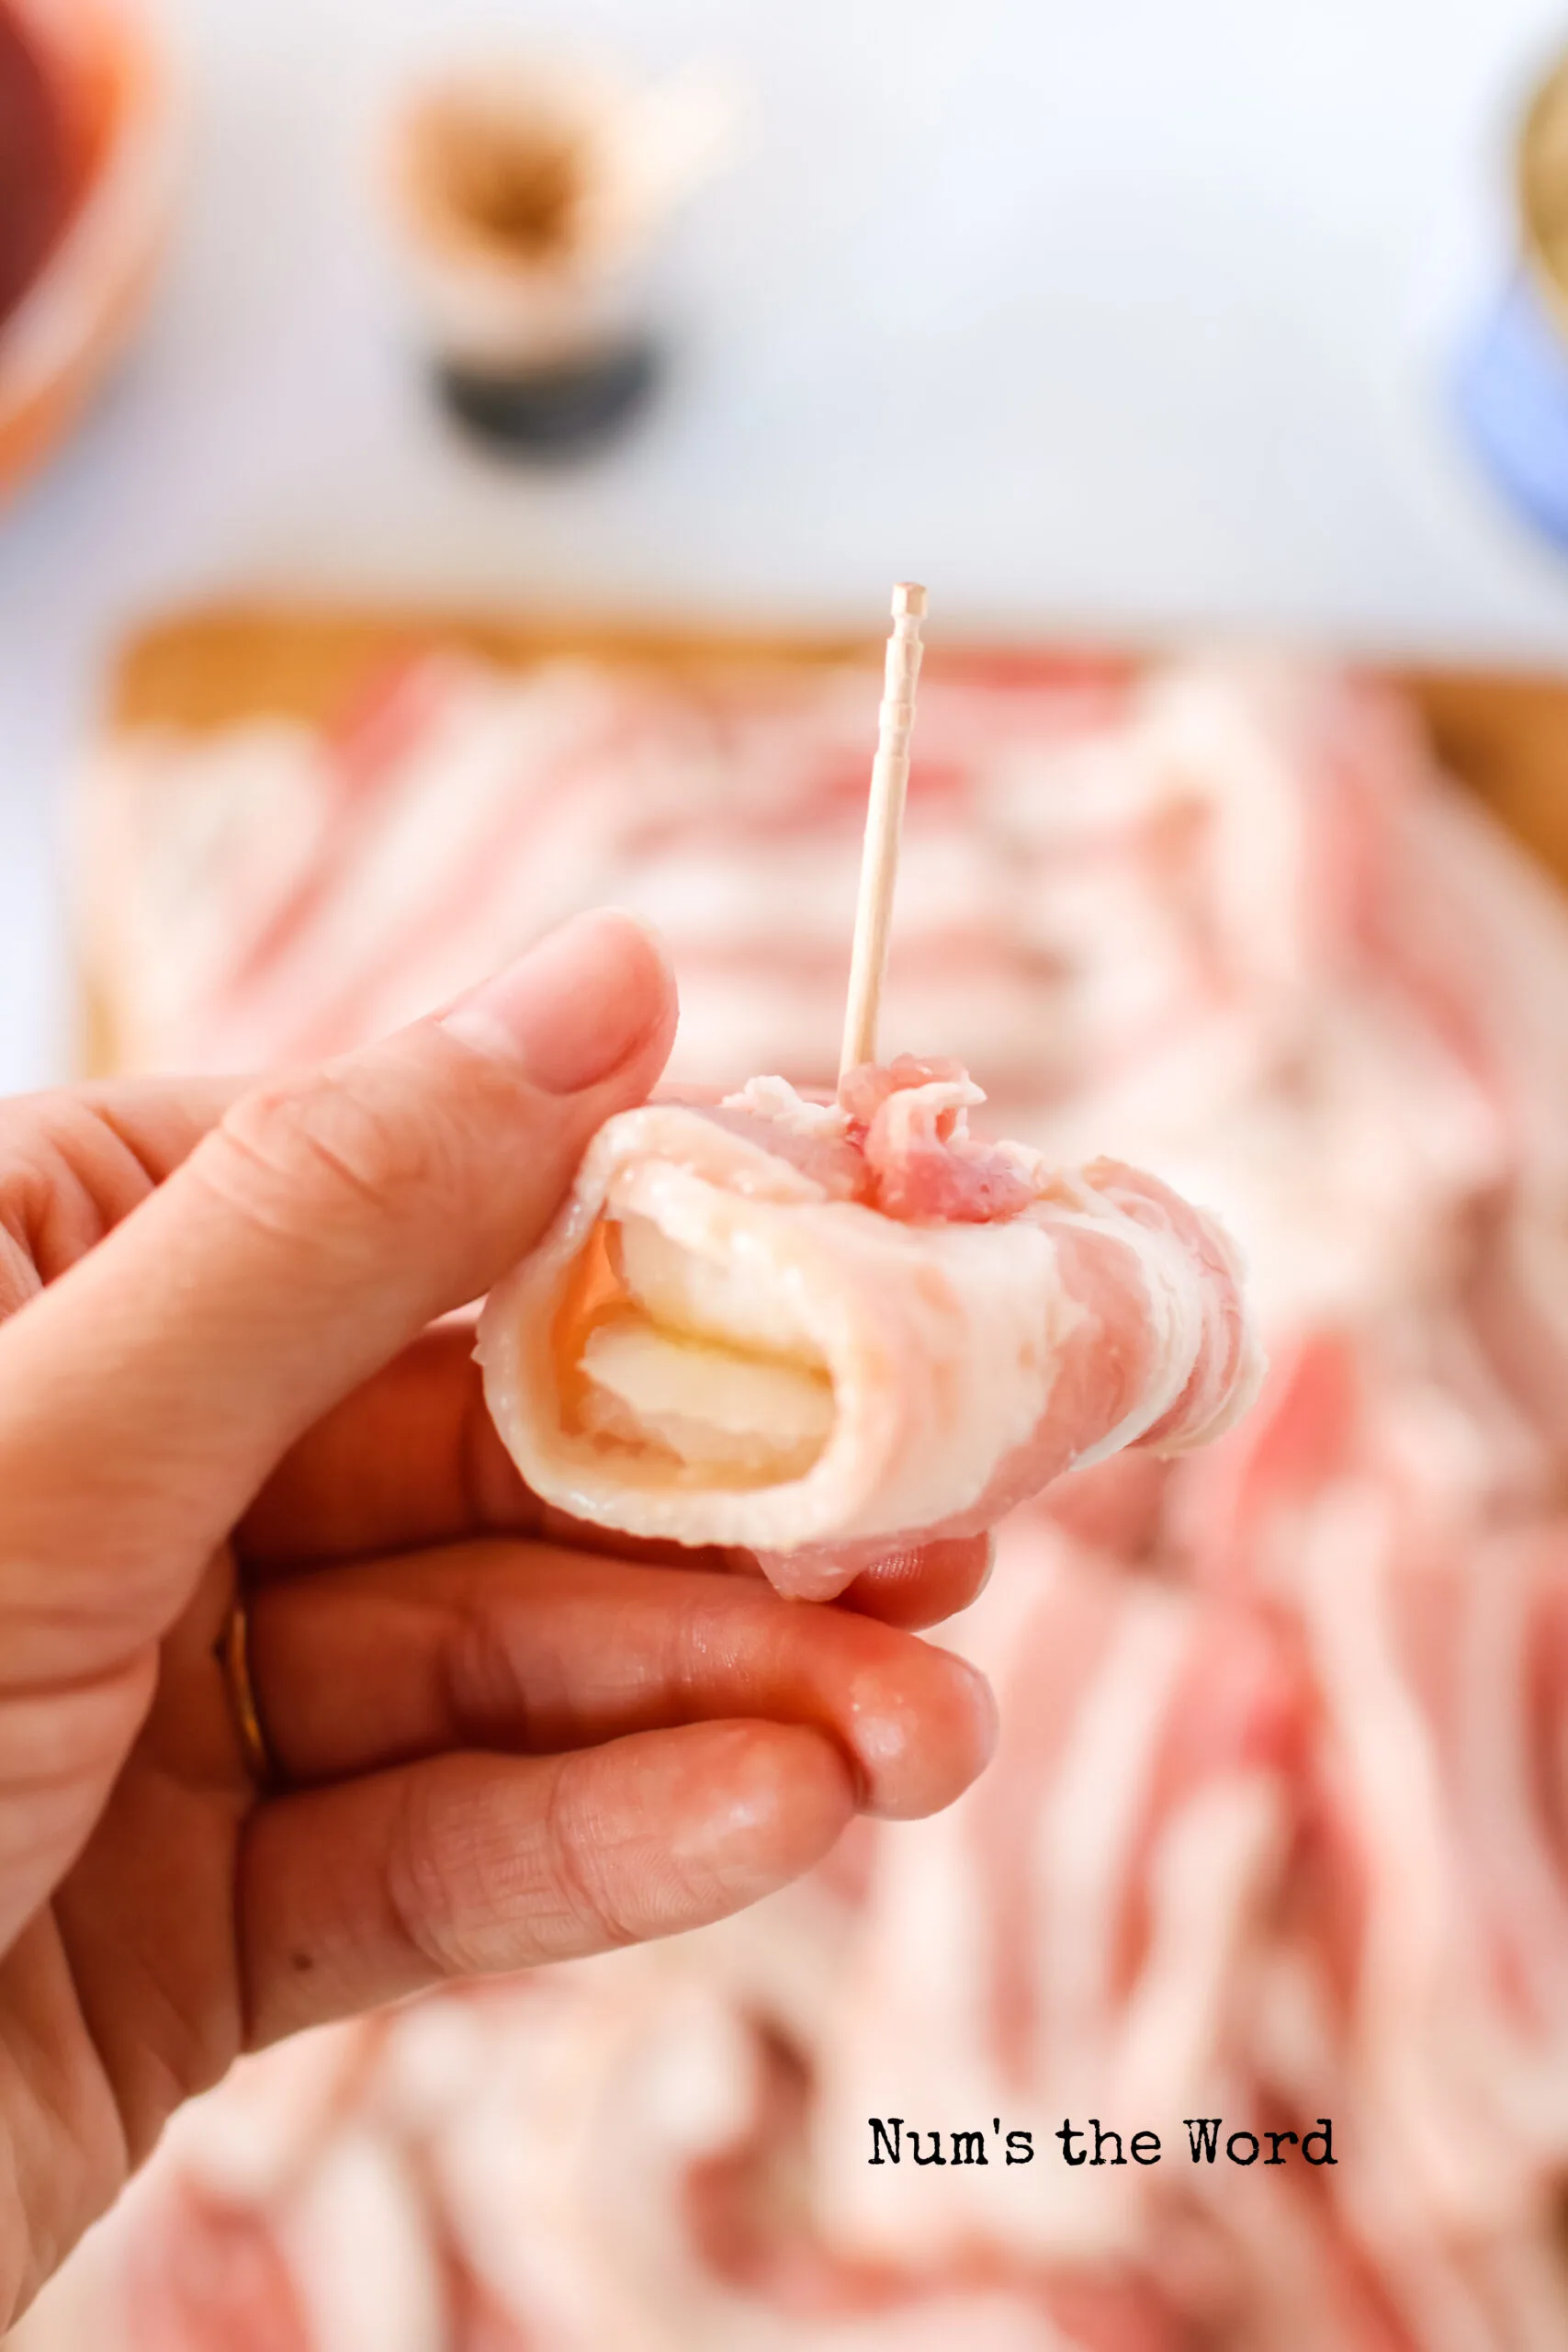 Bacon wrapped around two slices of water chestnut, secured with a toothpic, uncooked